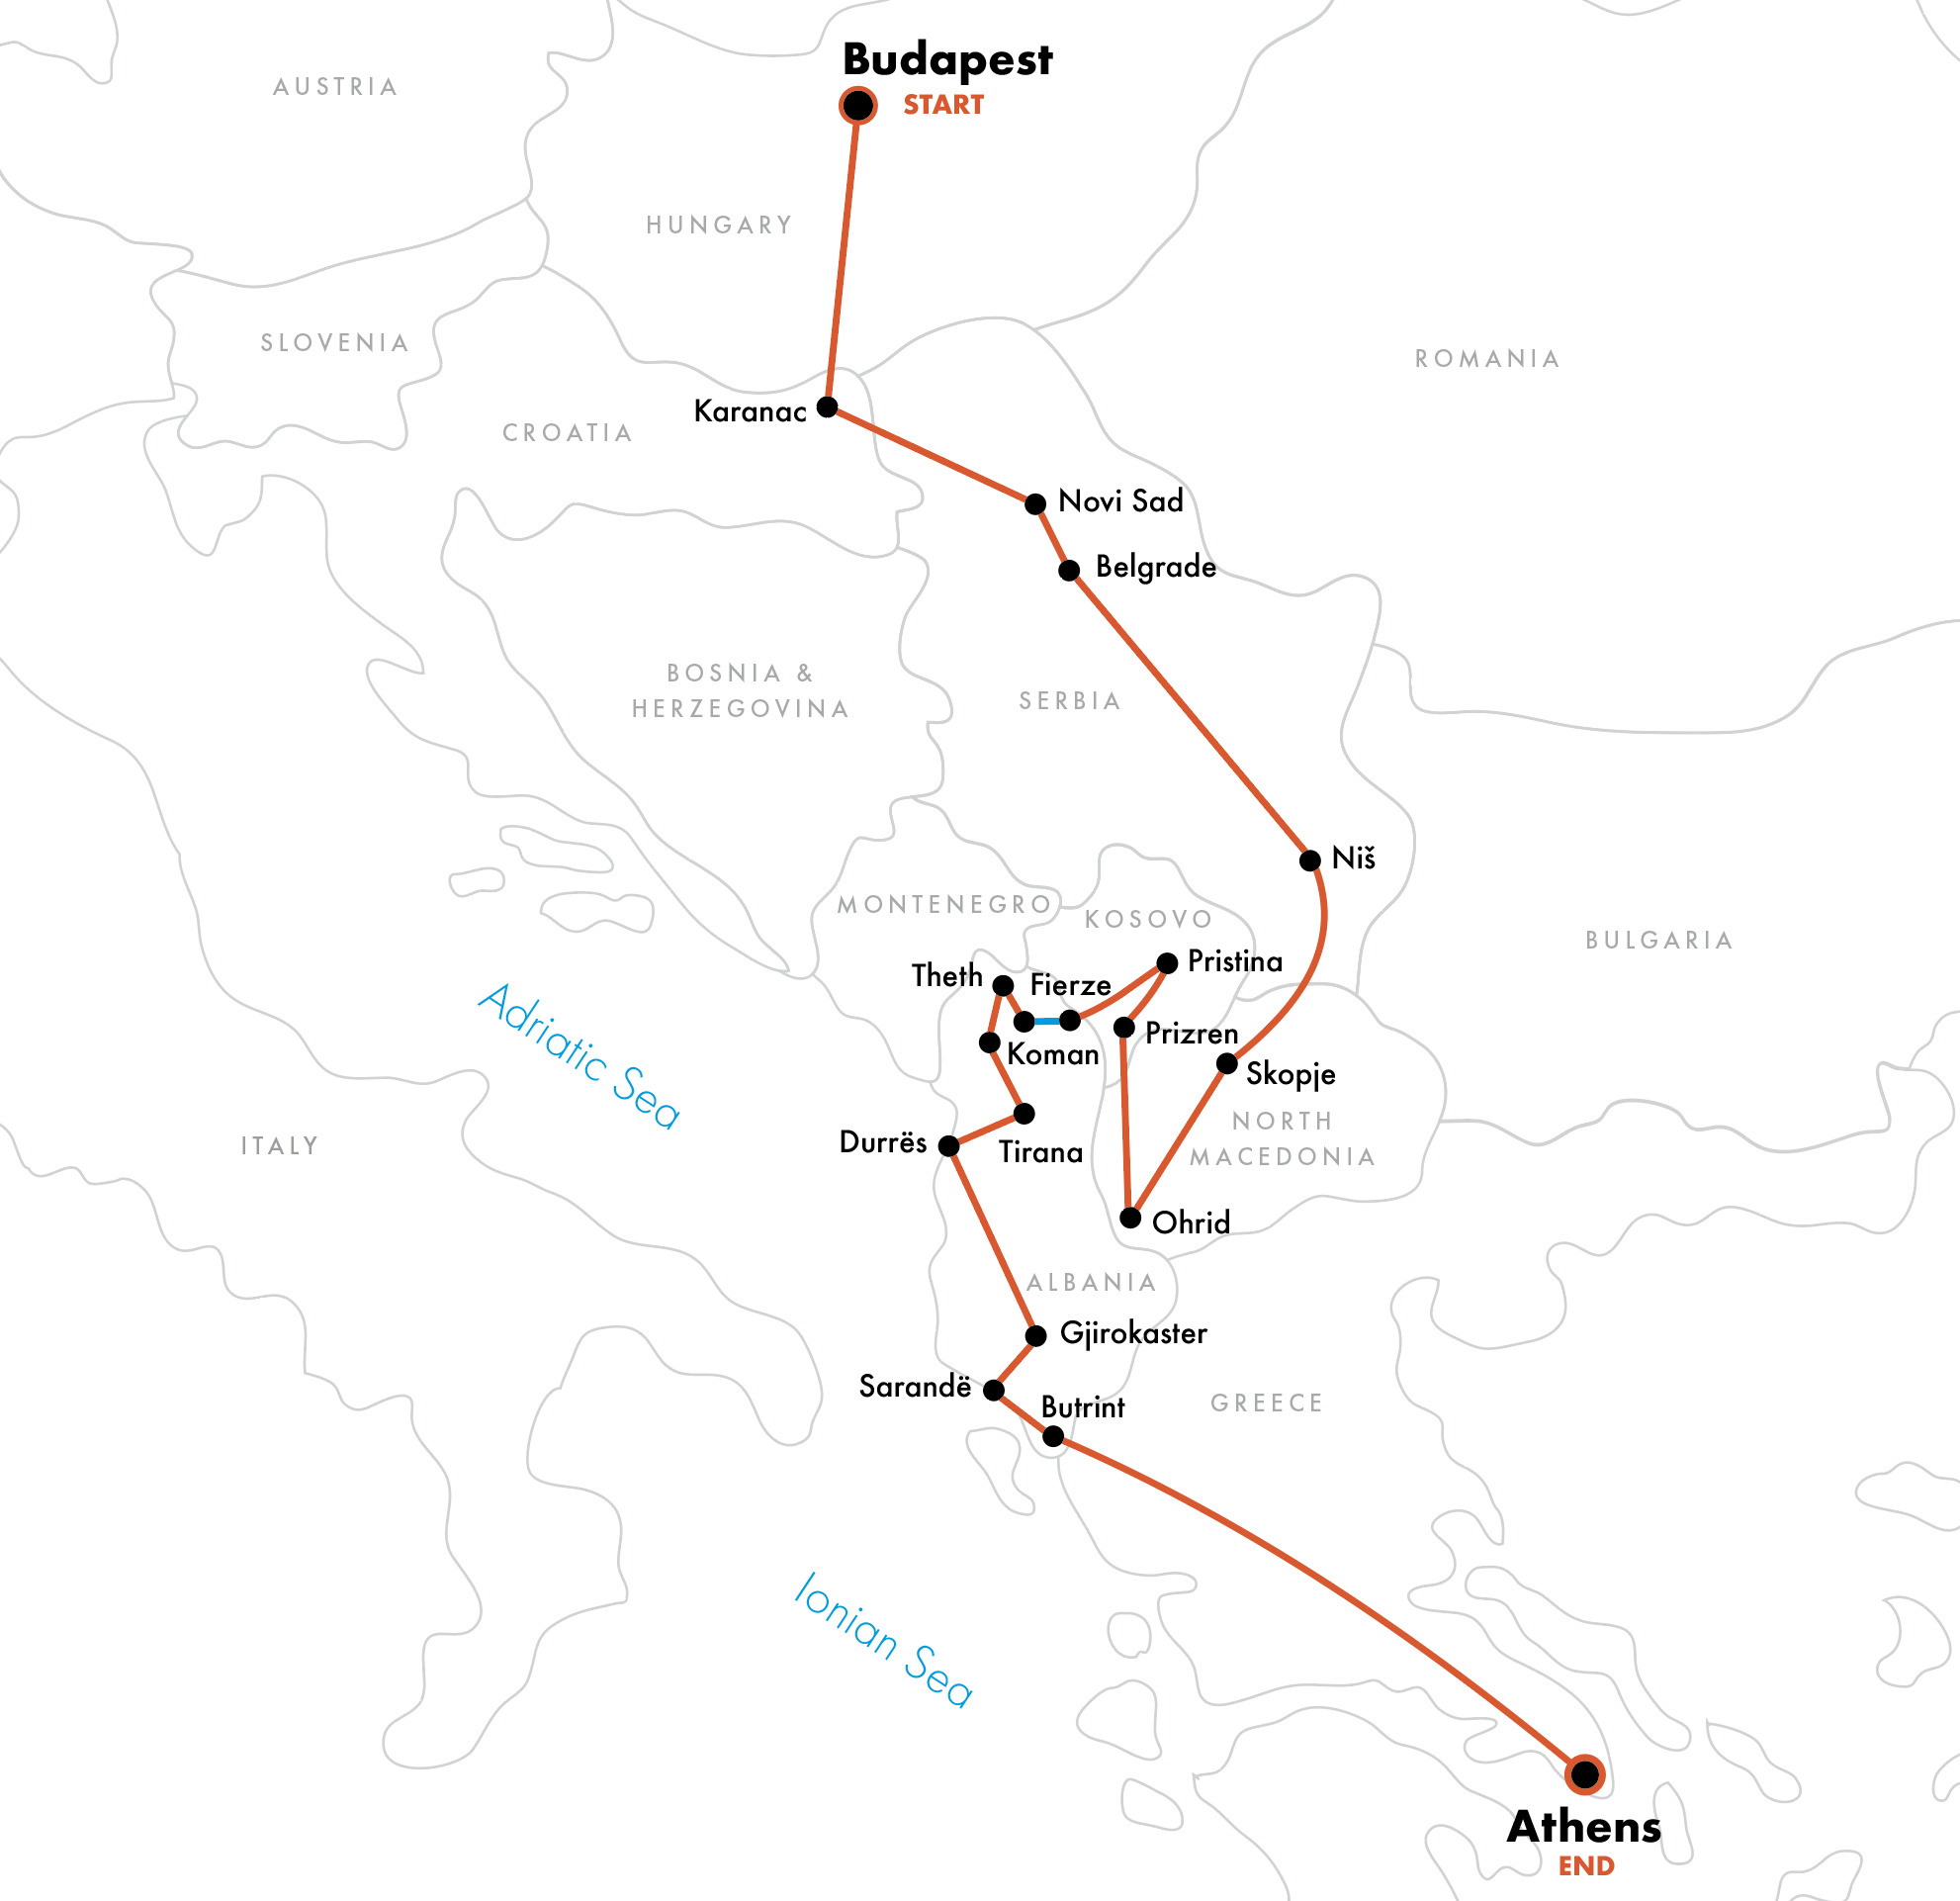 15D Balkan Tour from Budapest to Athens via Balkans